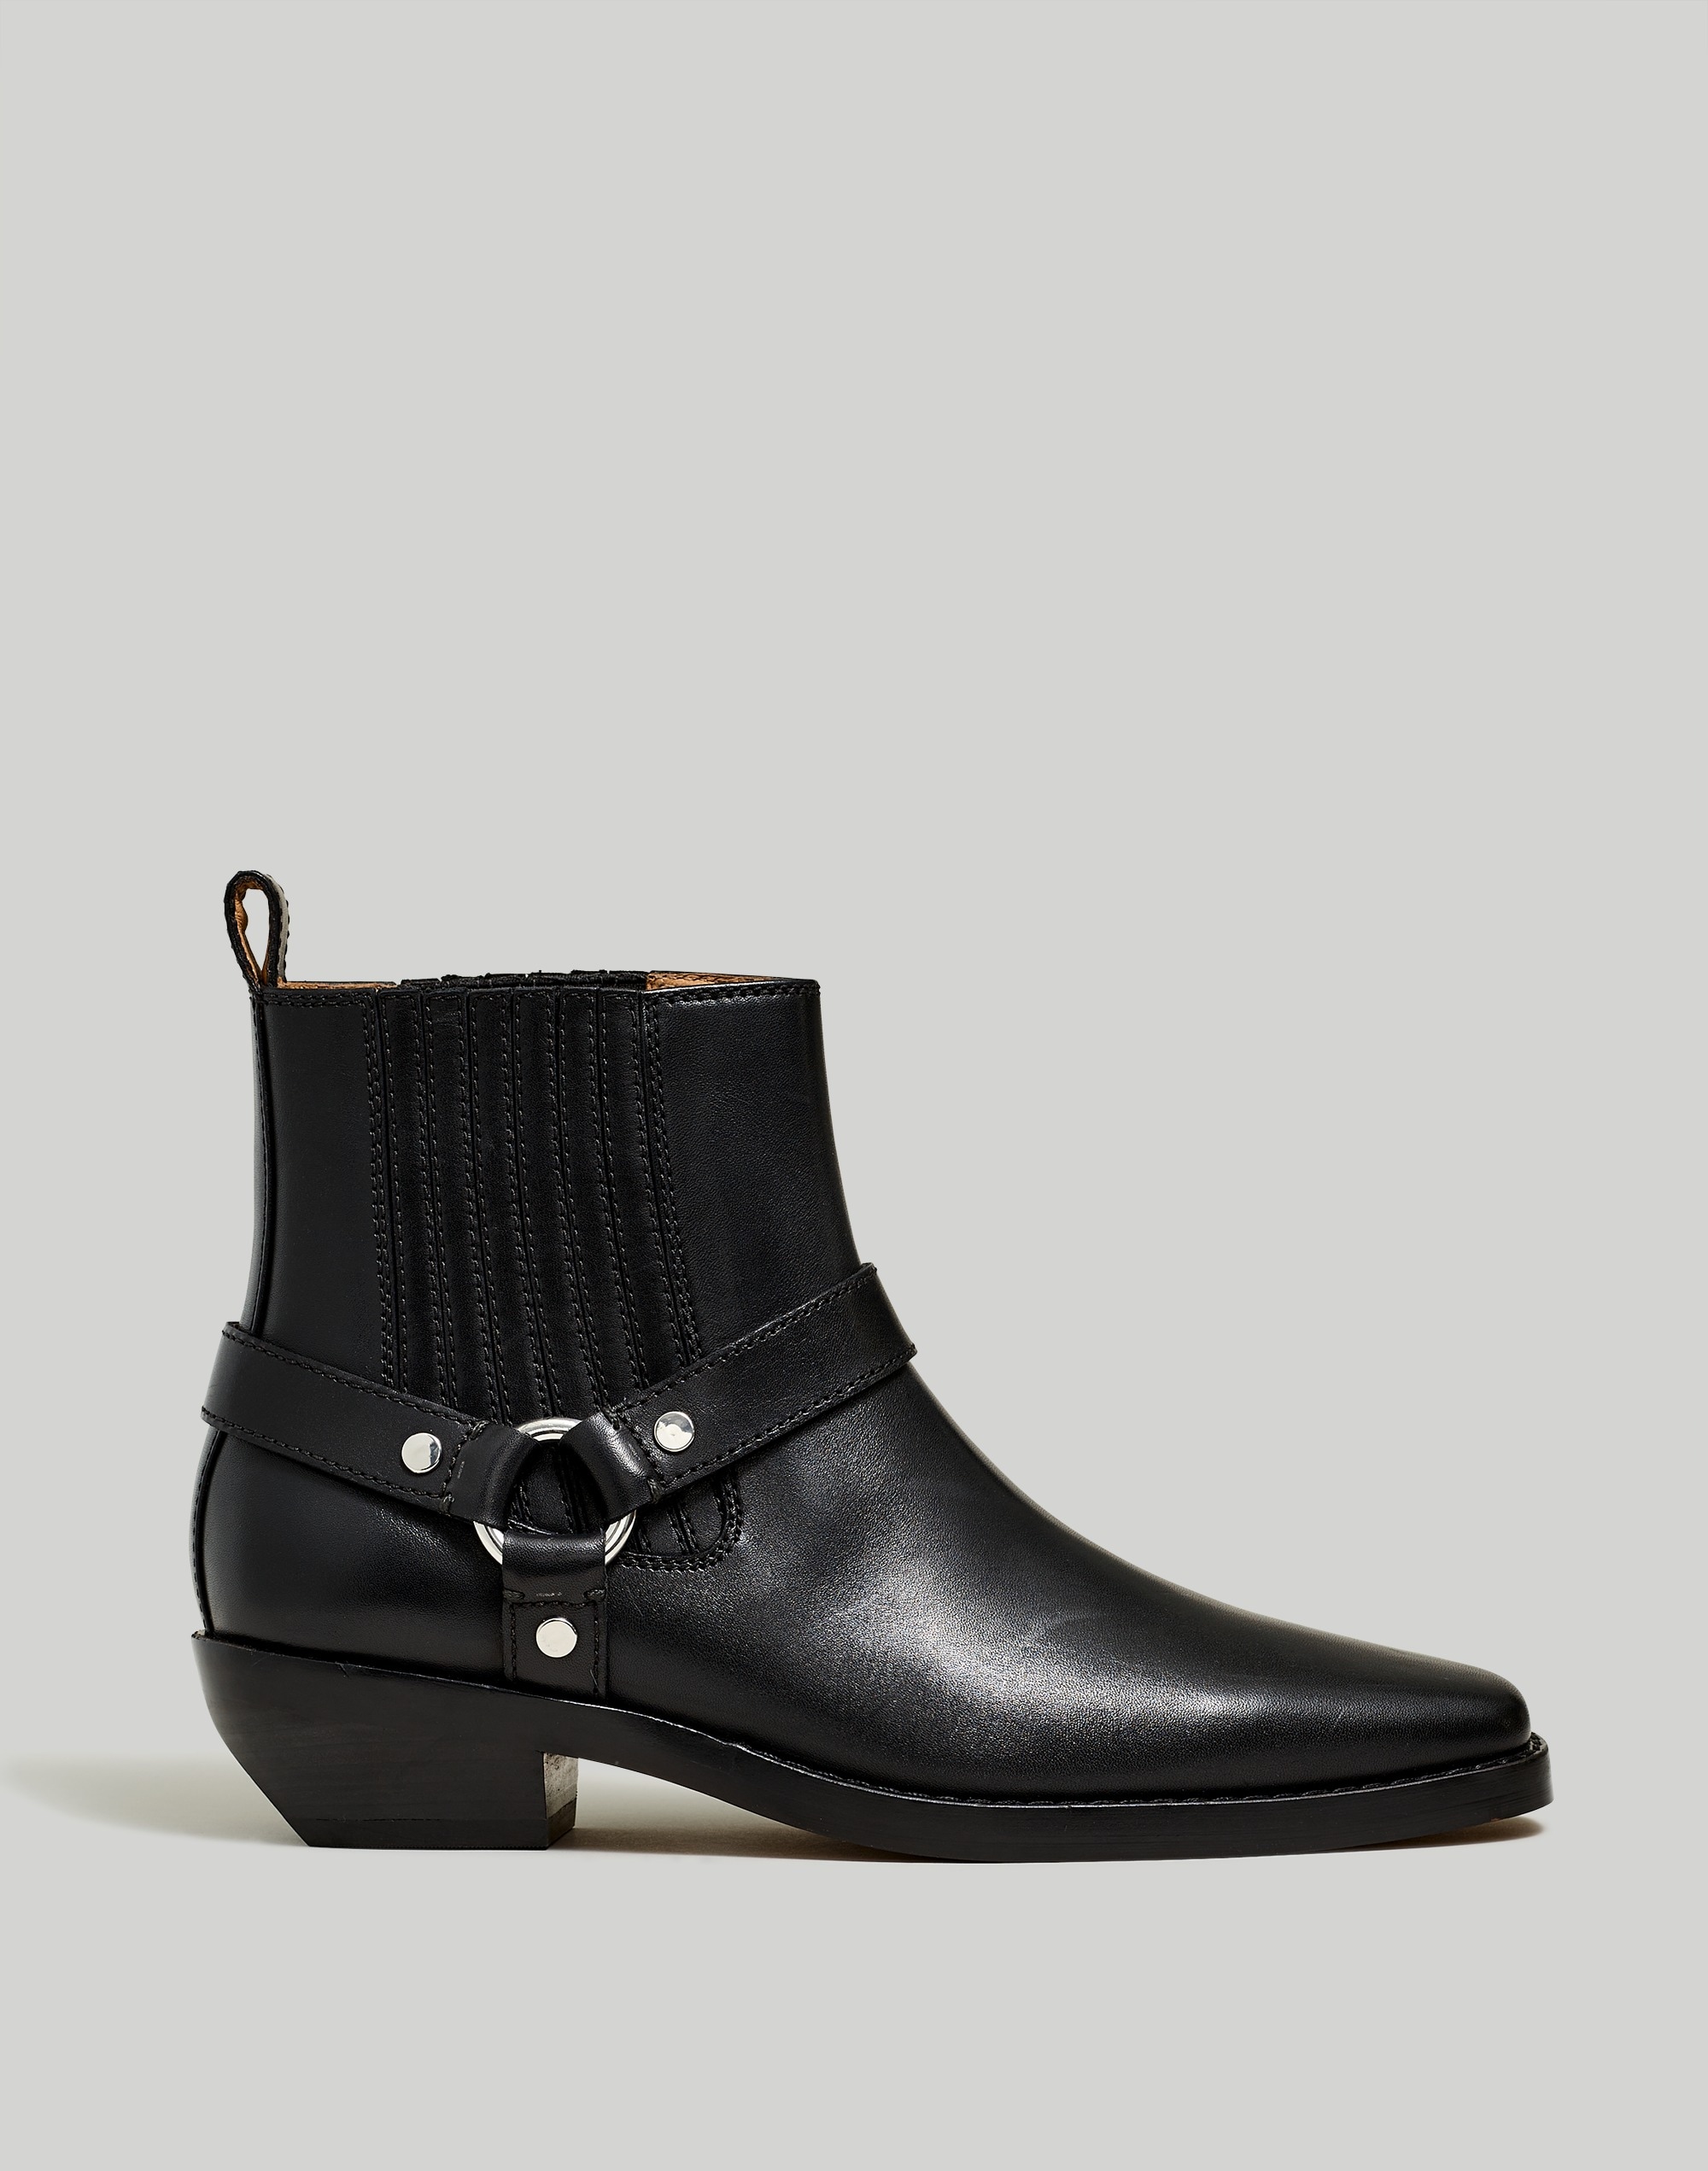 The Santiago Western Ankle Boot Leather